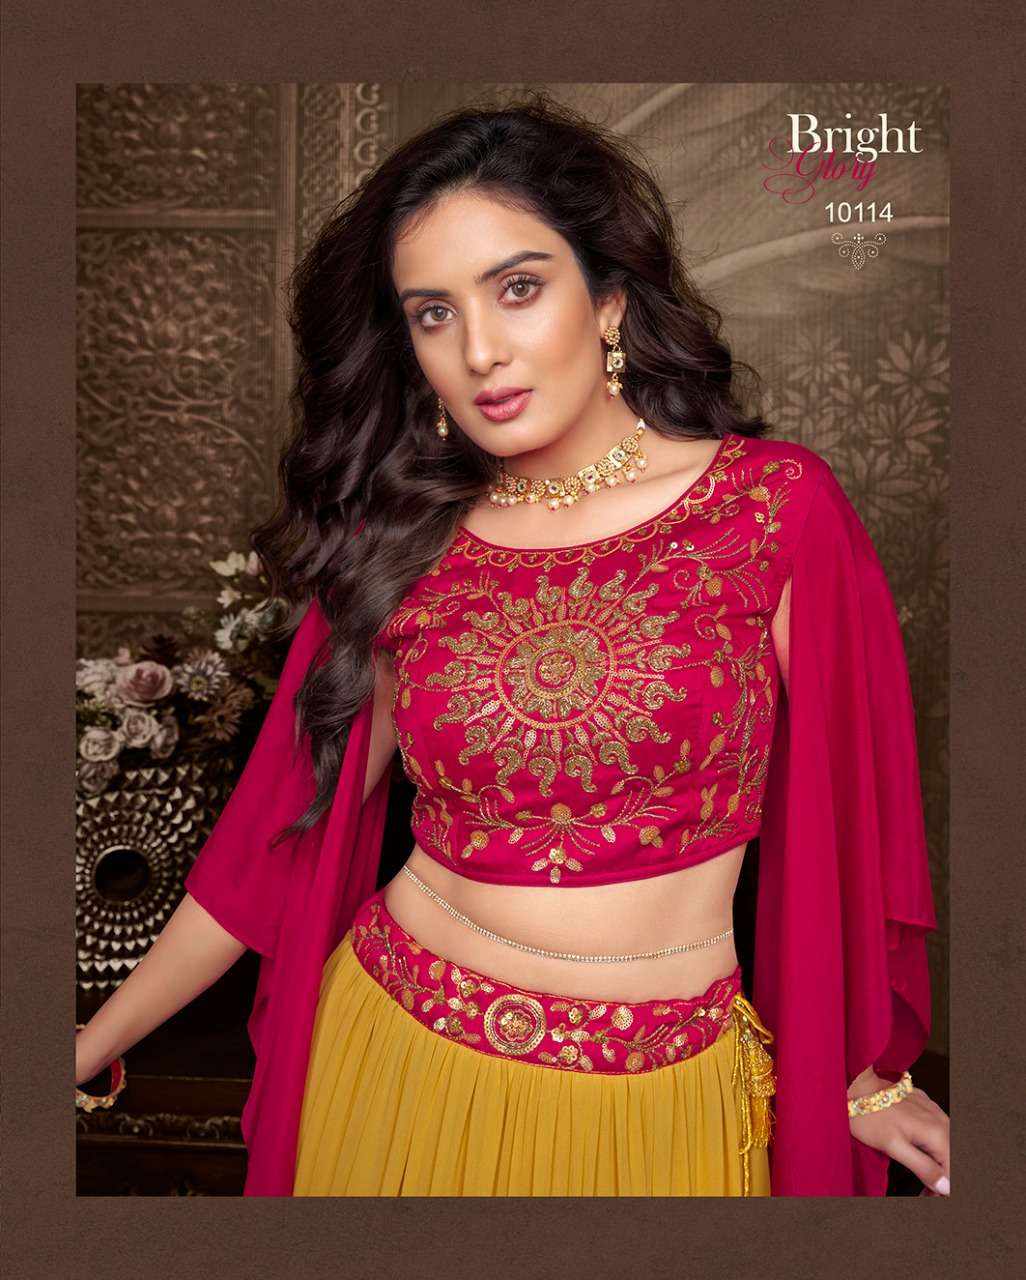 lily&lali tyohaar 10111-10114 series designer handwork choli with skirt collection wholesale price 